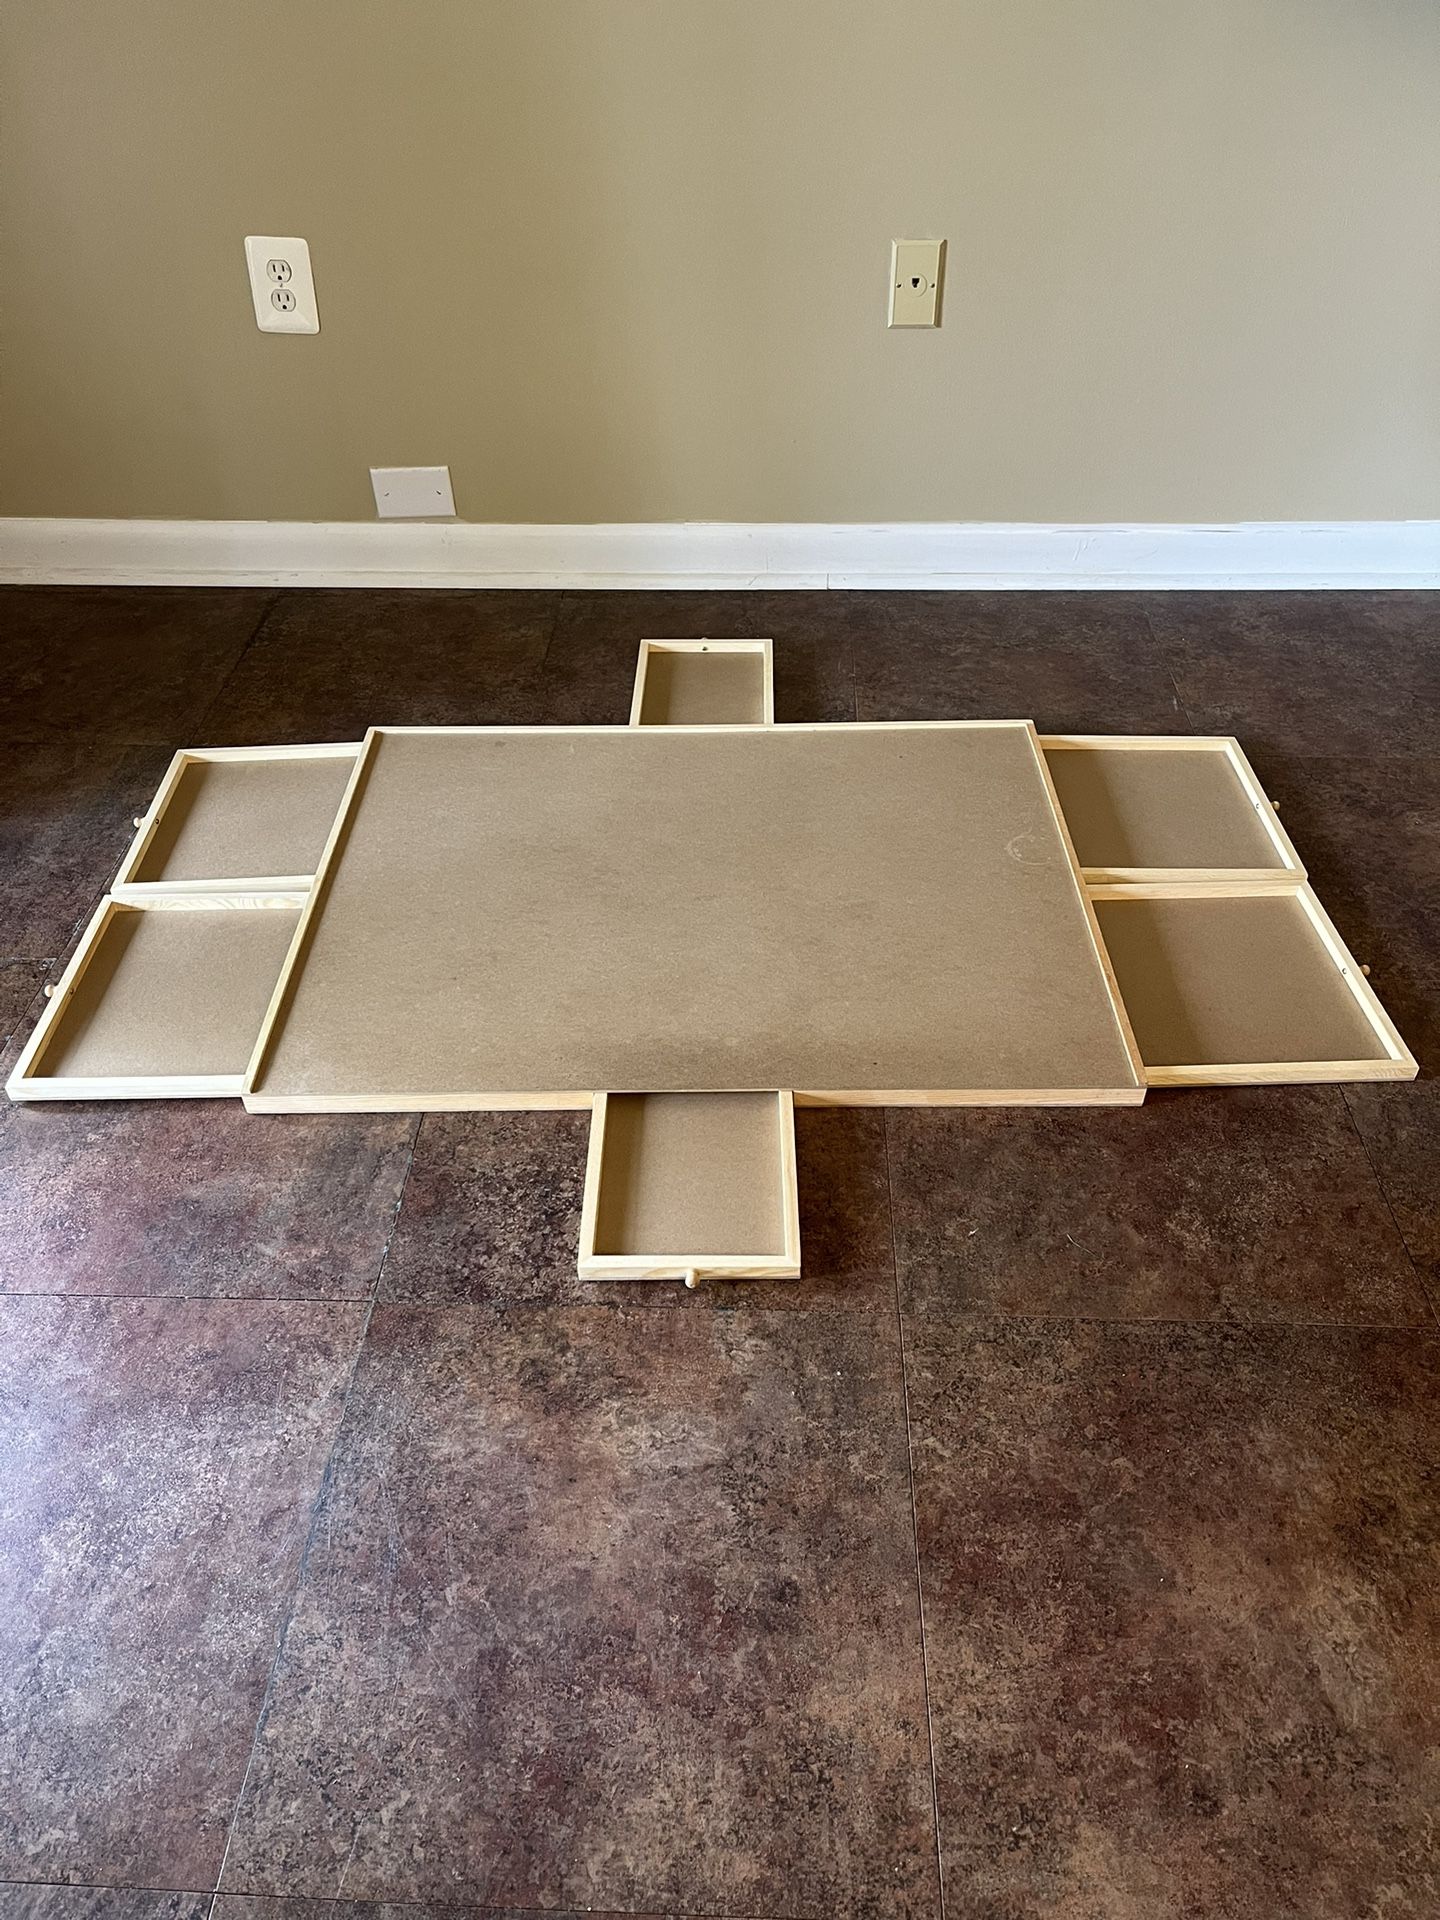 Puzzle Assembly Board FREE